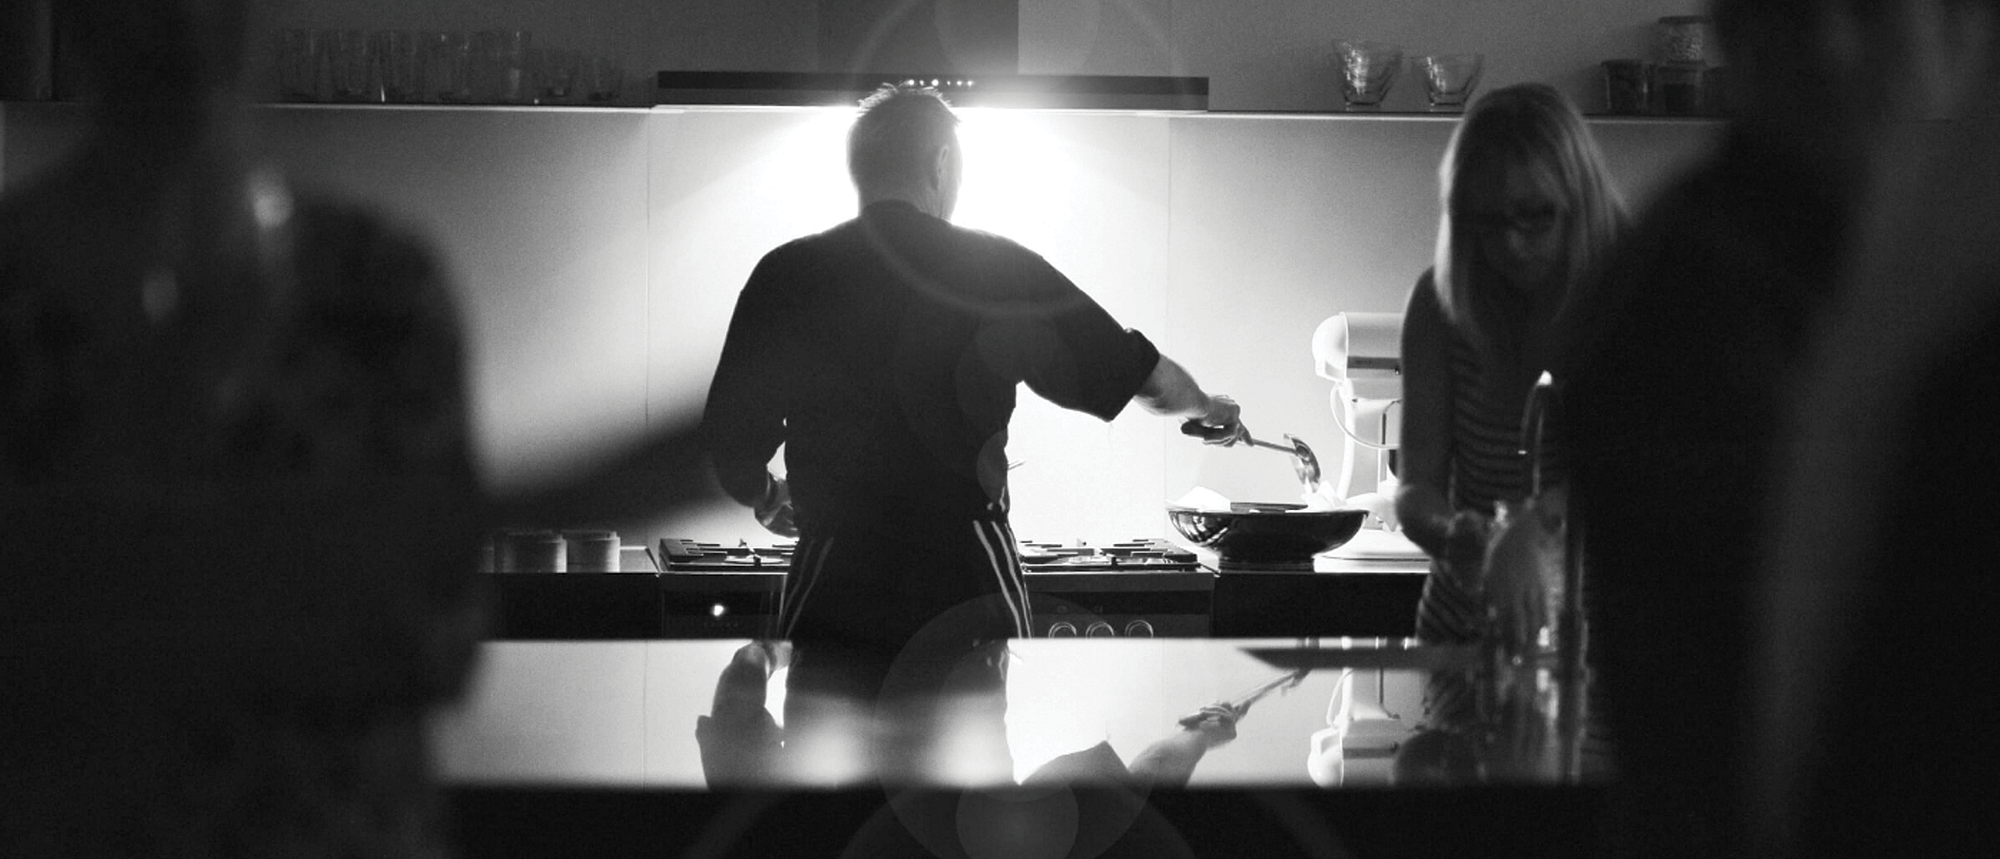 Black and white image of a busy kitchen. Man is seen standing at a range cooker scooping food into a bowl. Woman filling jug with water from sink.